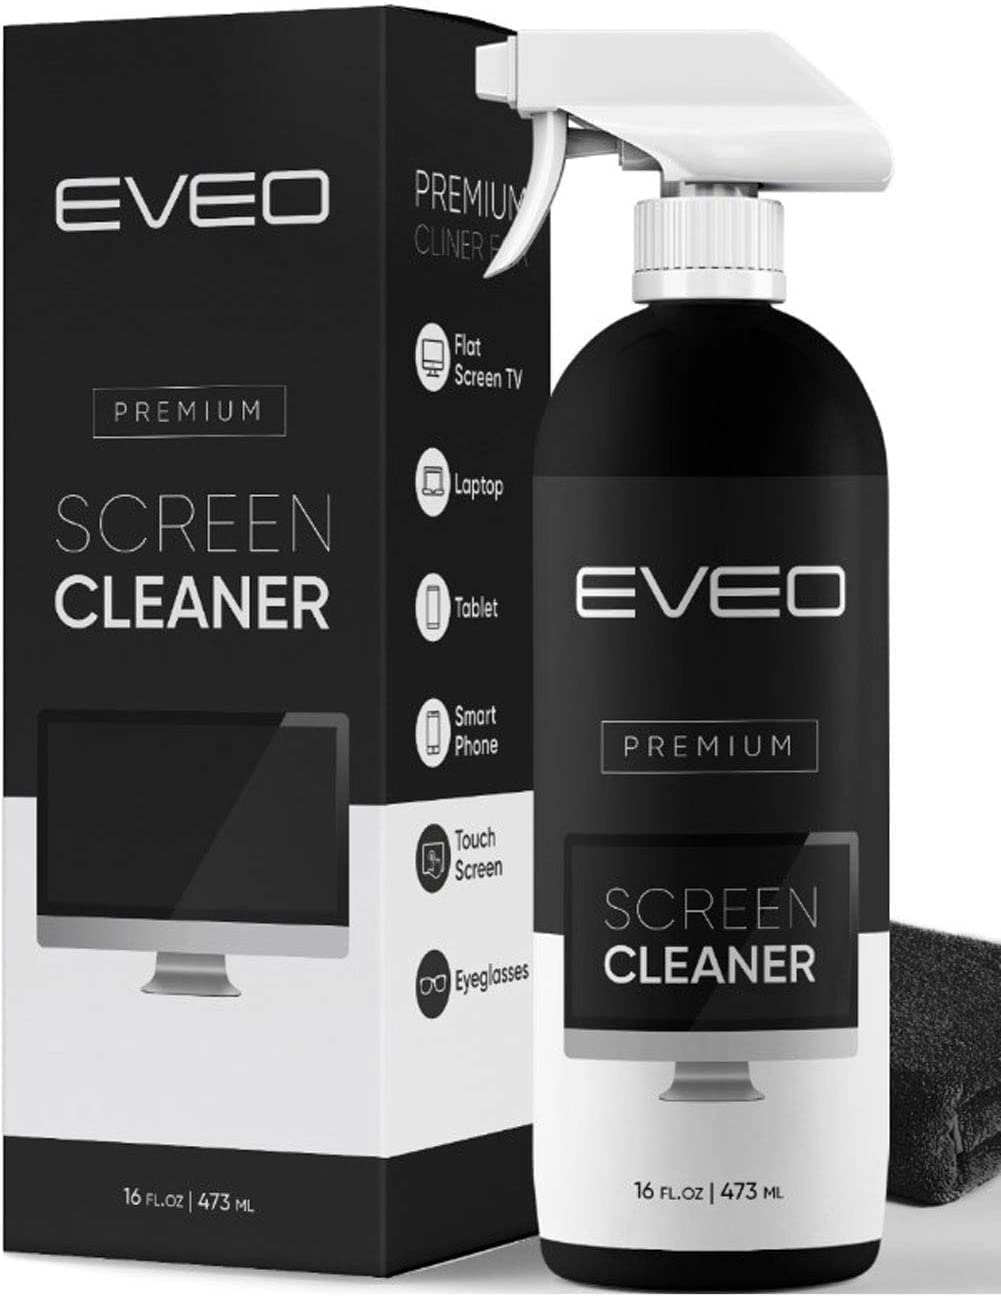 Screen Cleaner Spray